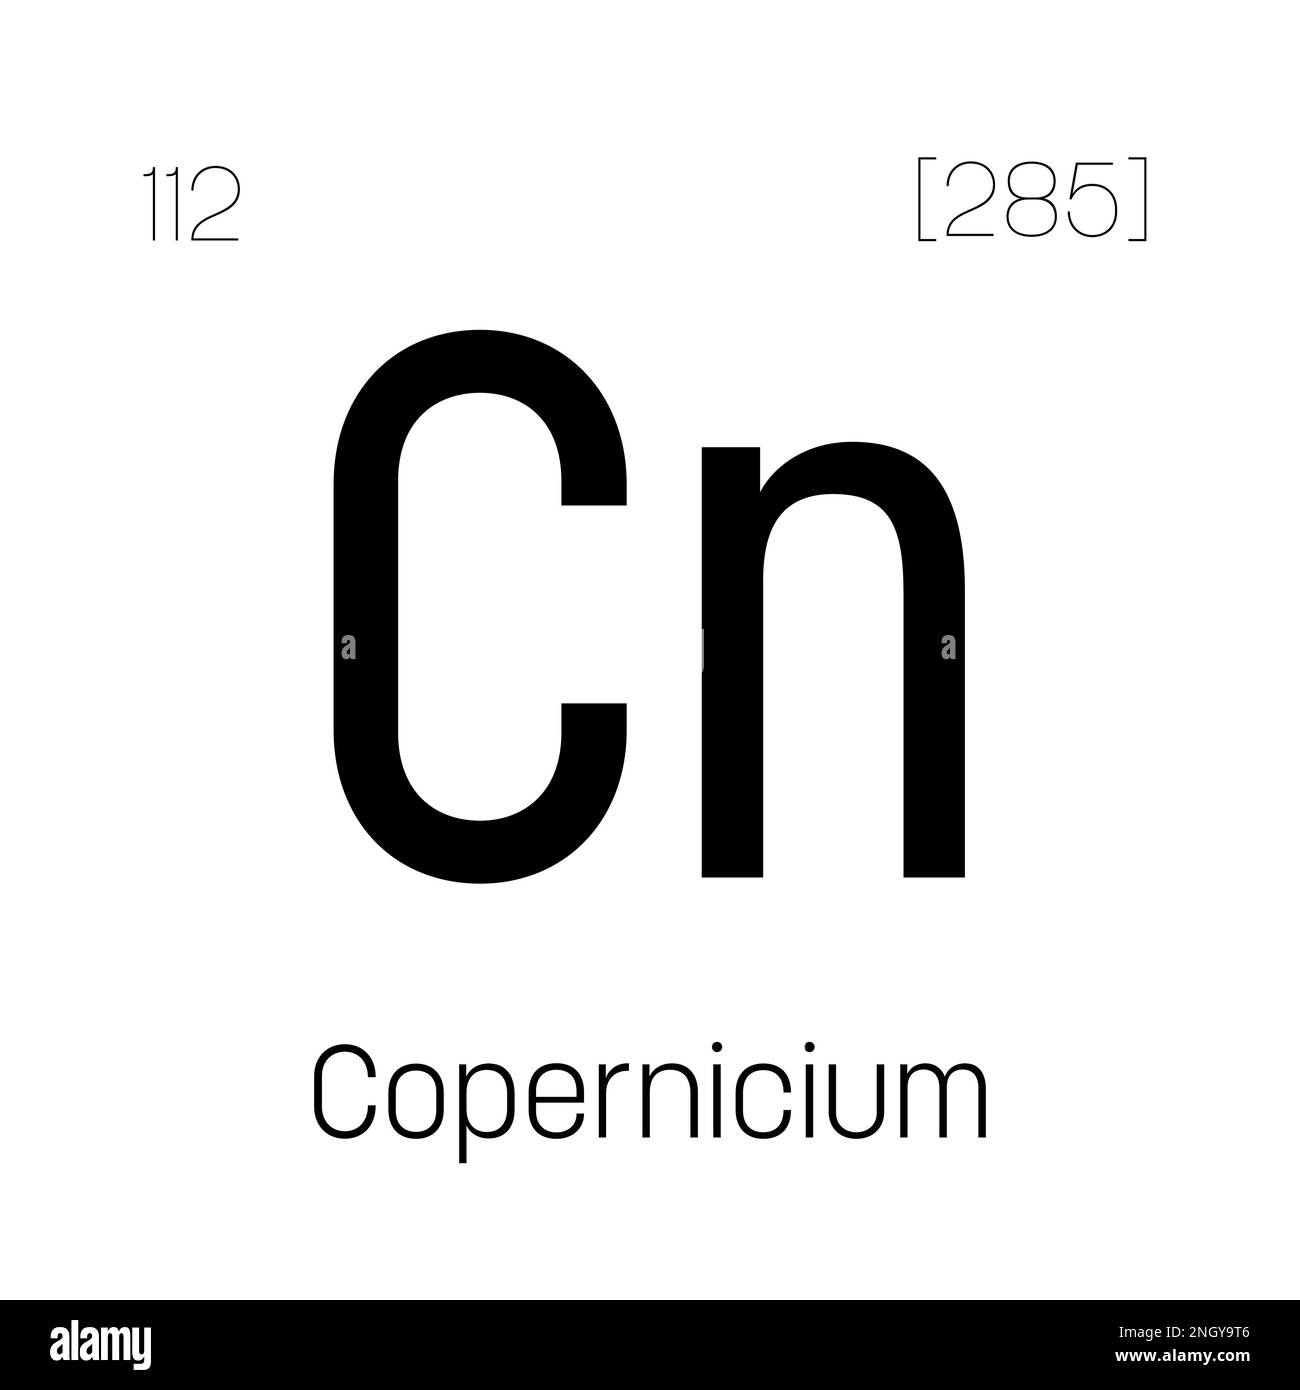 Chromium, Cr, periodic table element with name, symbol, atomic number and weight. Transition metal with various industrial uses, such as in stainless steel, electroplating, and as a pigment in dyes and paint. Stock Vector